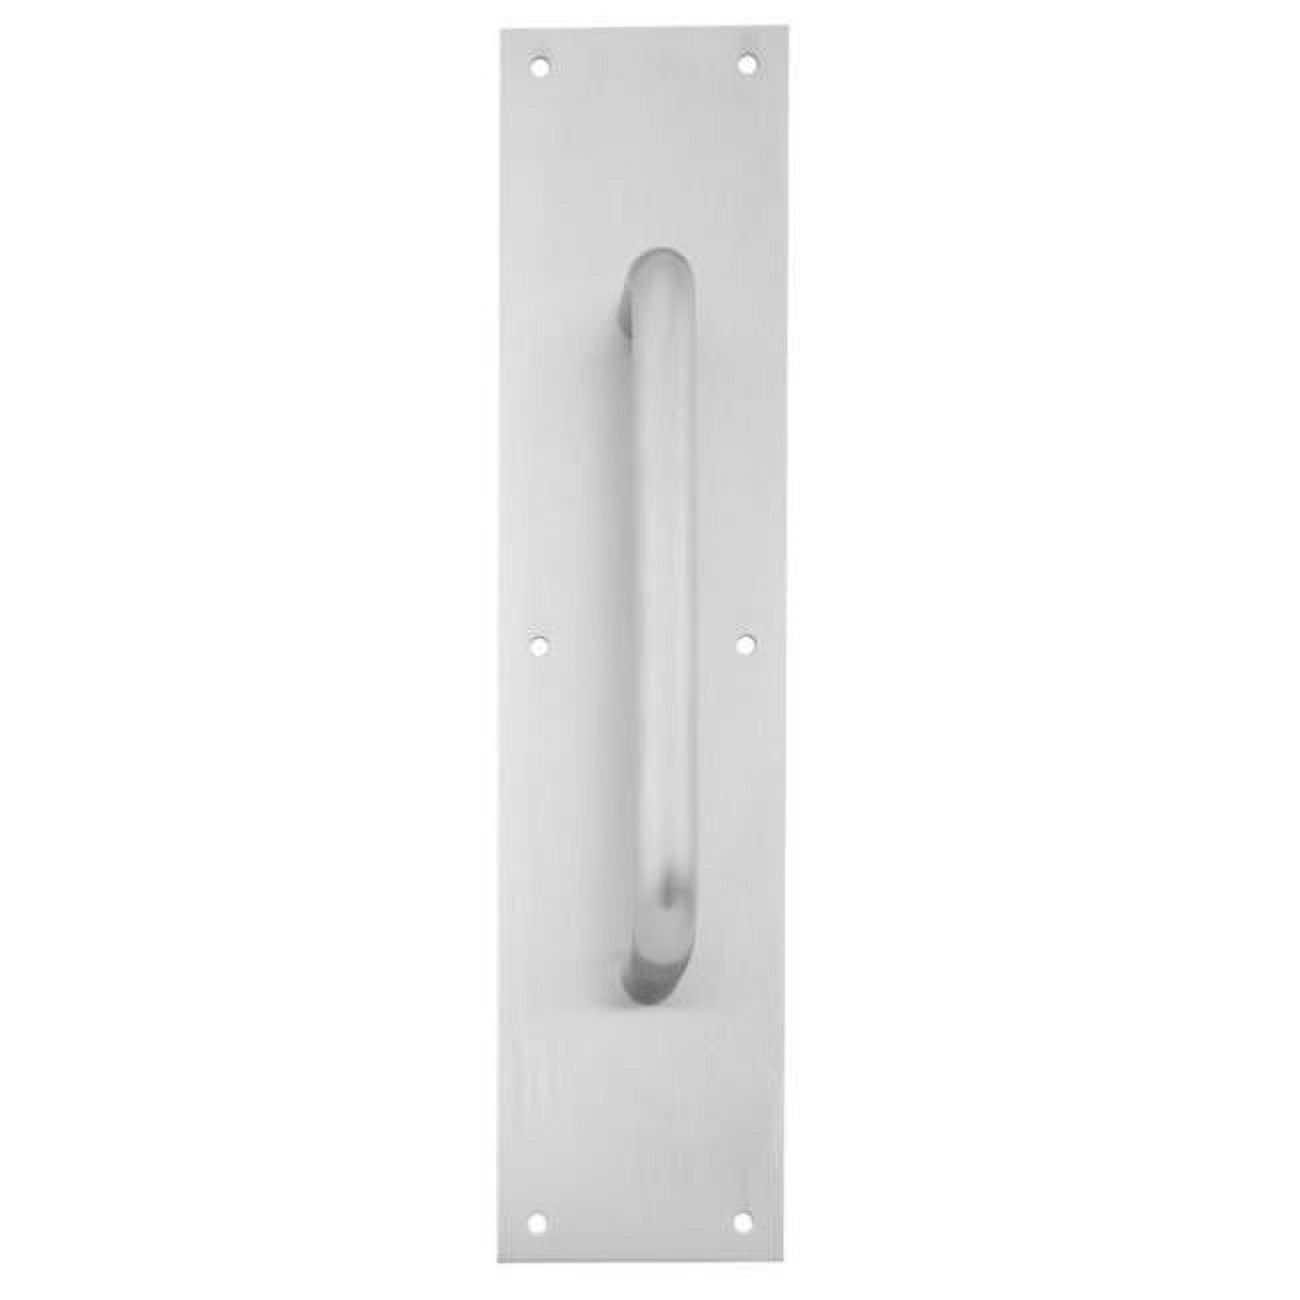 4 x 16 in. Square Corner Pull Plate with 6 in. 1194 Pull, Satin Stainless Steel - image 1 of 1